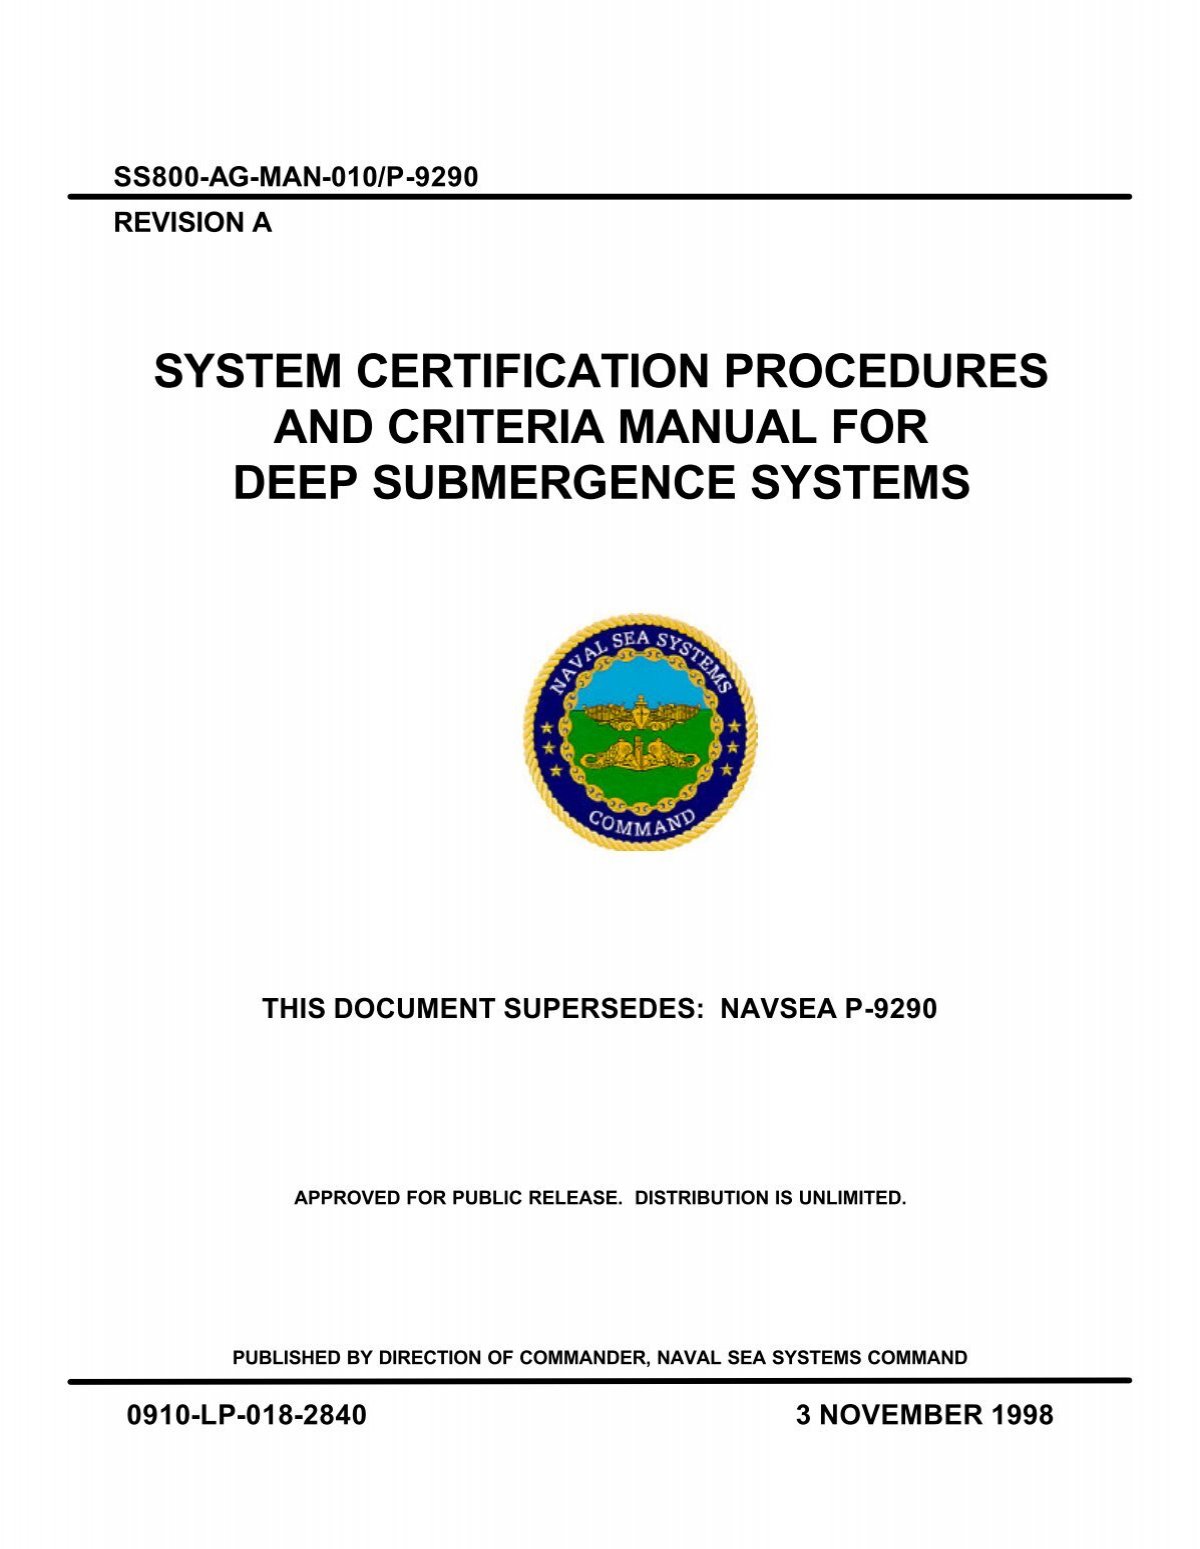 System Certification Procedures and Criteria Manual for Deep